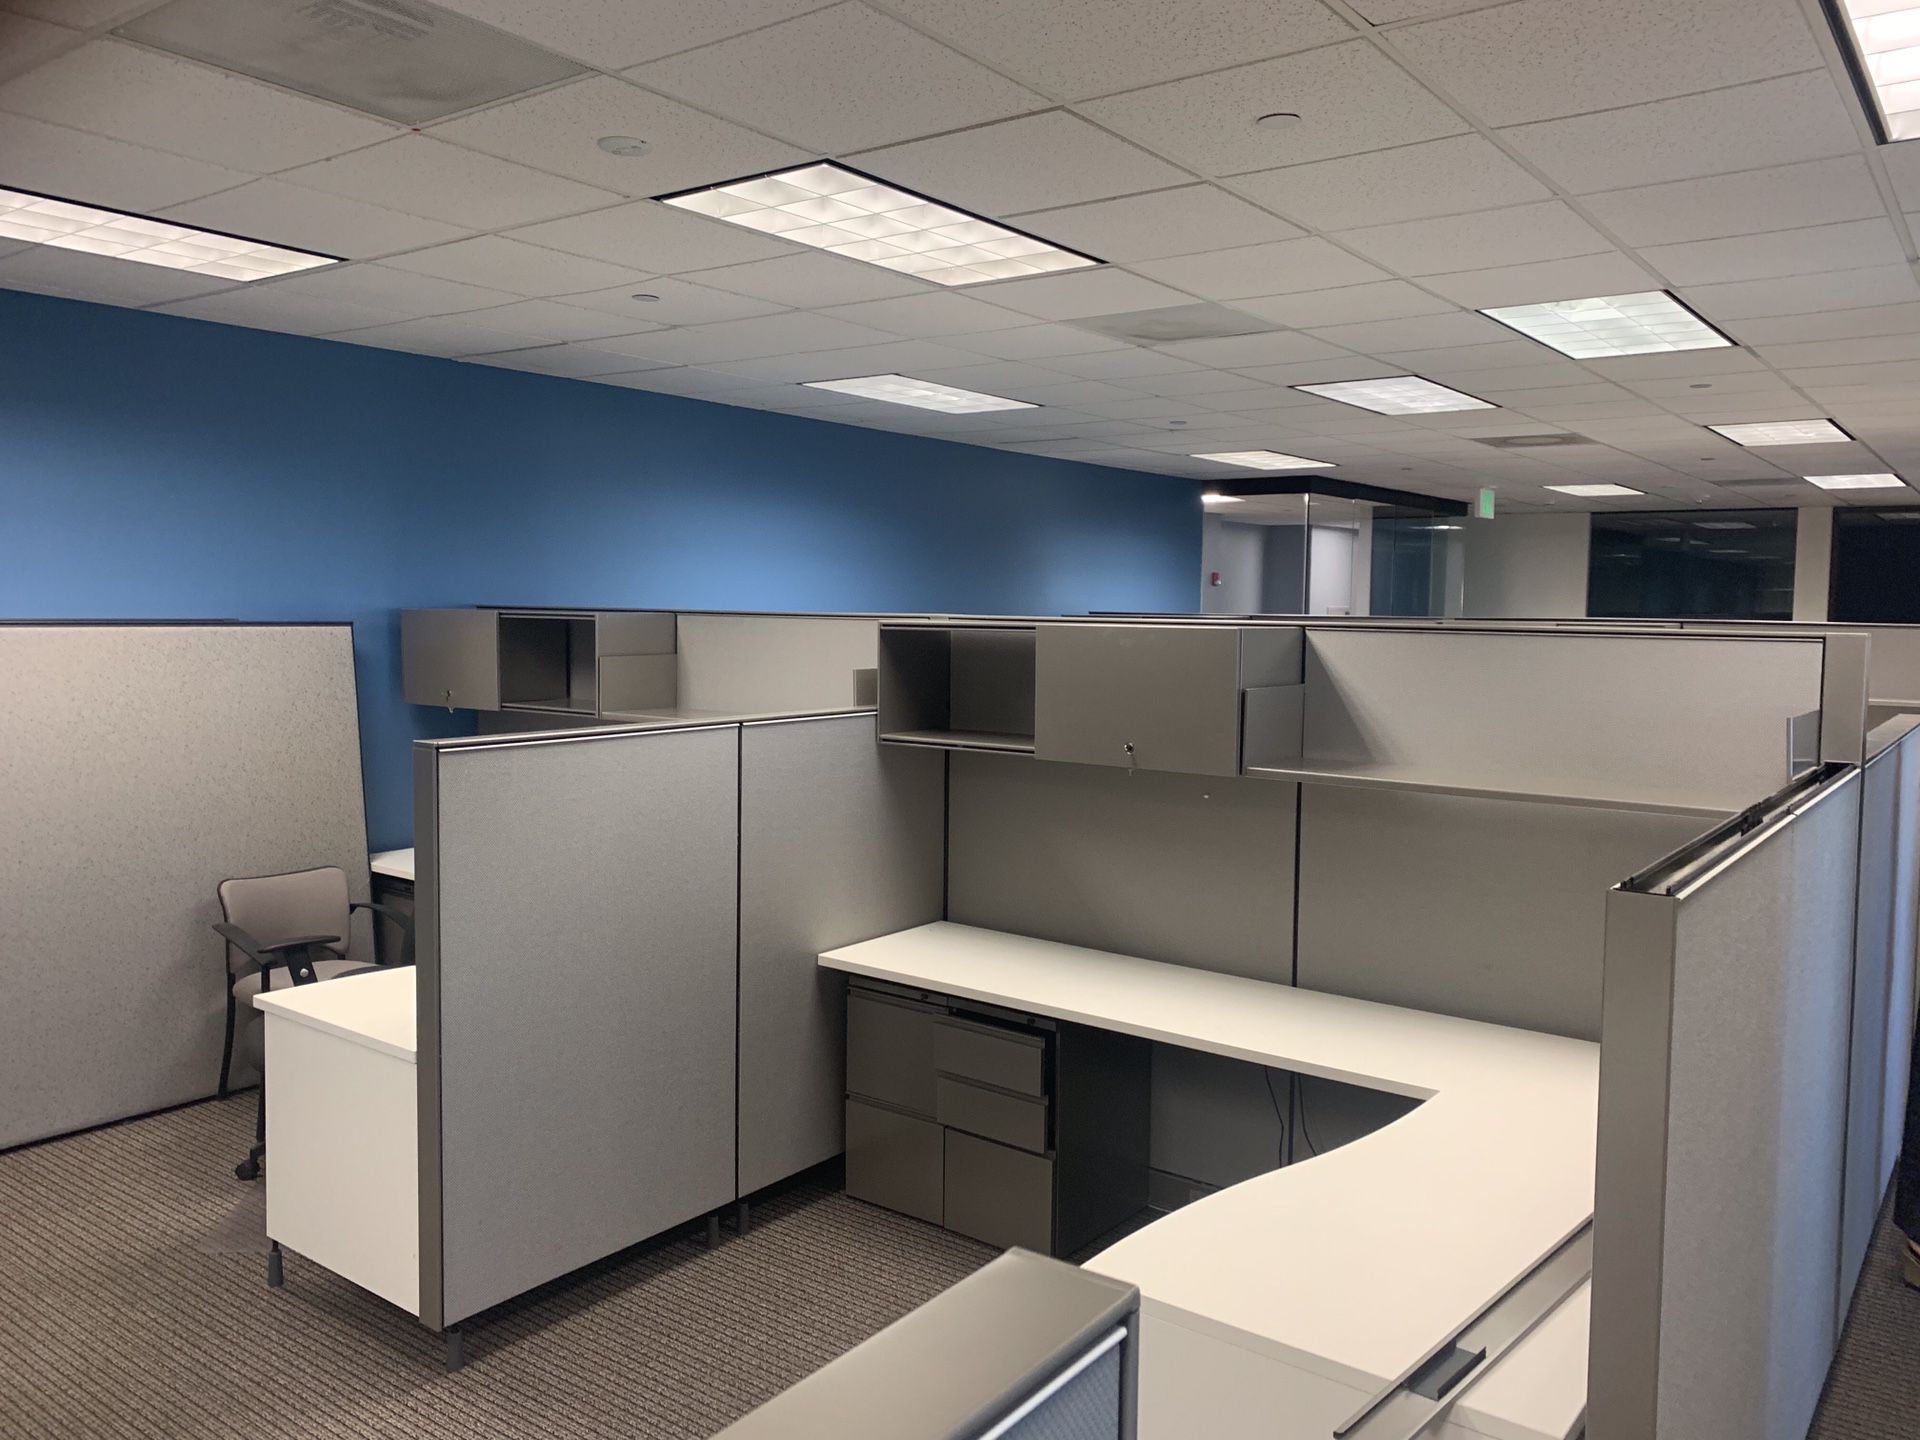 Cubicles 8x6 or 8x8